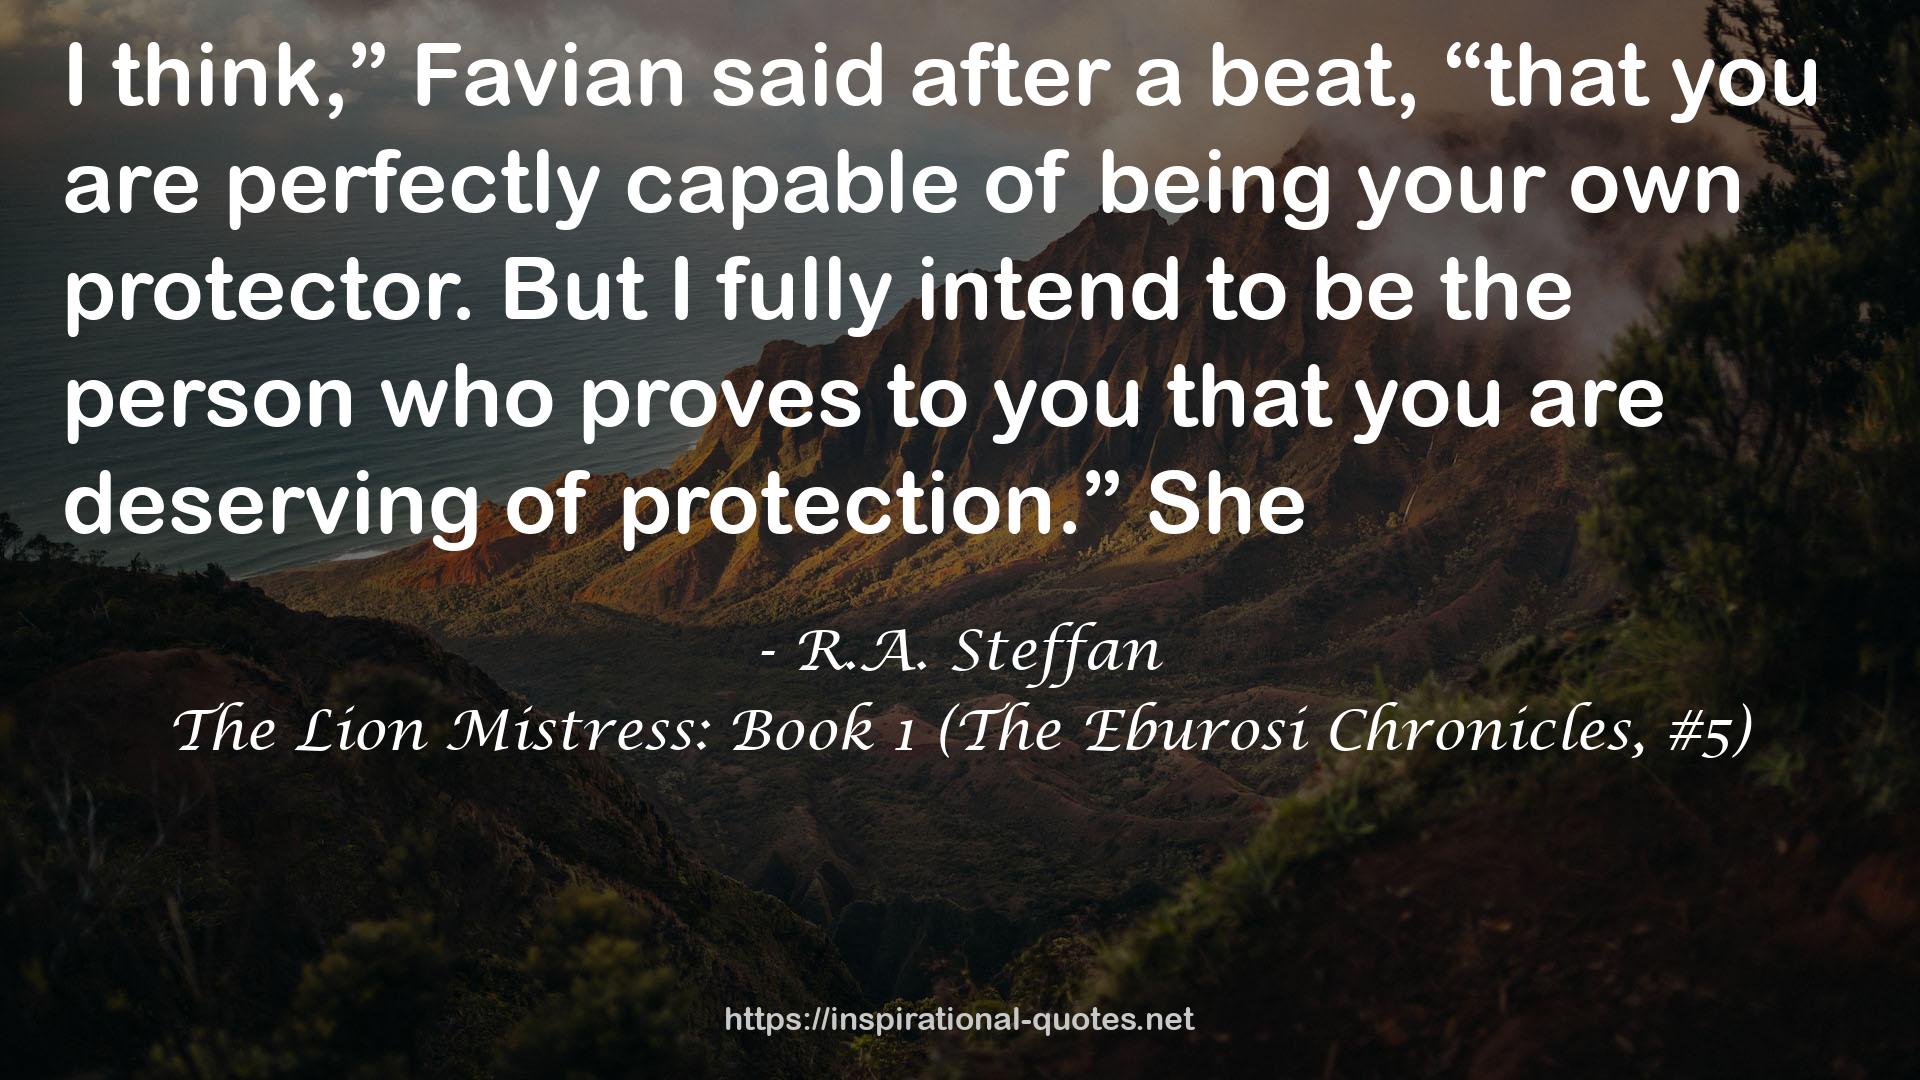 The Lion Mistress: Book 1 (The Eburosi Chronicles, #5) QUOTES